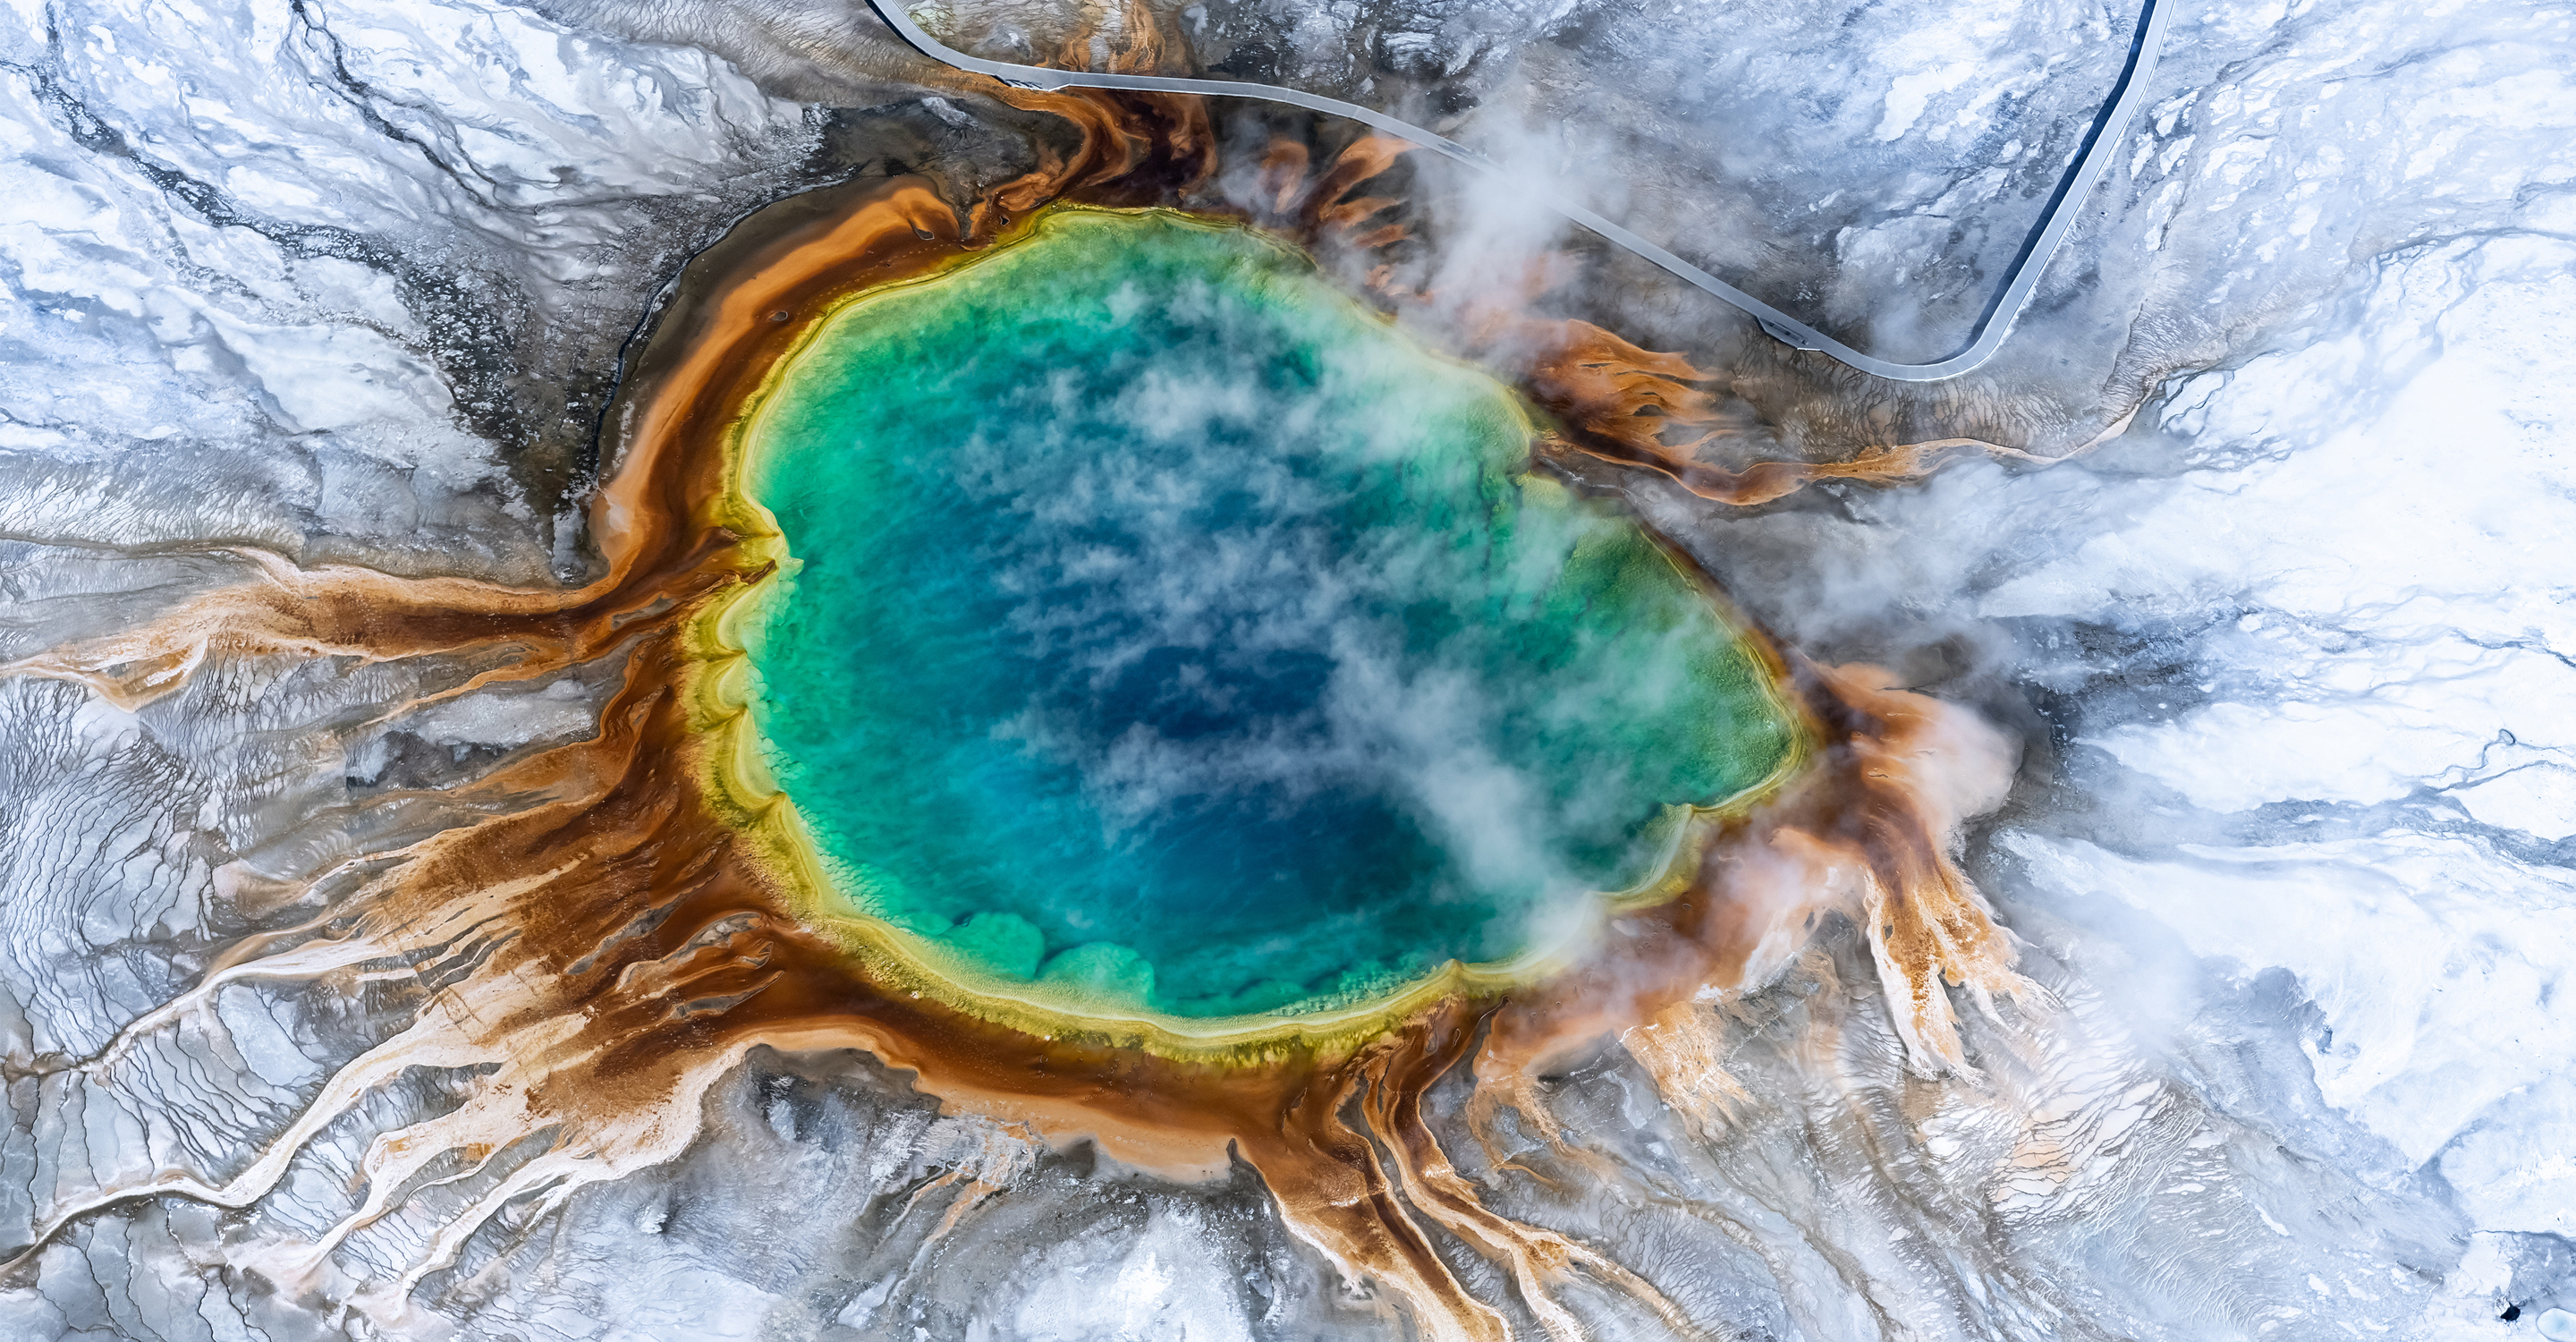 An aerial view of the Grand Prismatic Hot Spring in Yellowstone National Park, United States